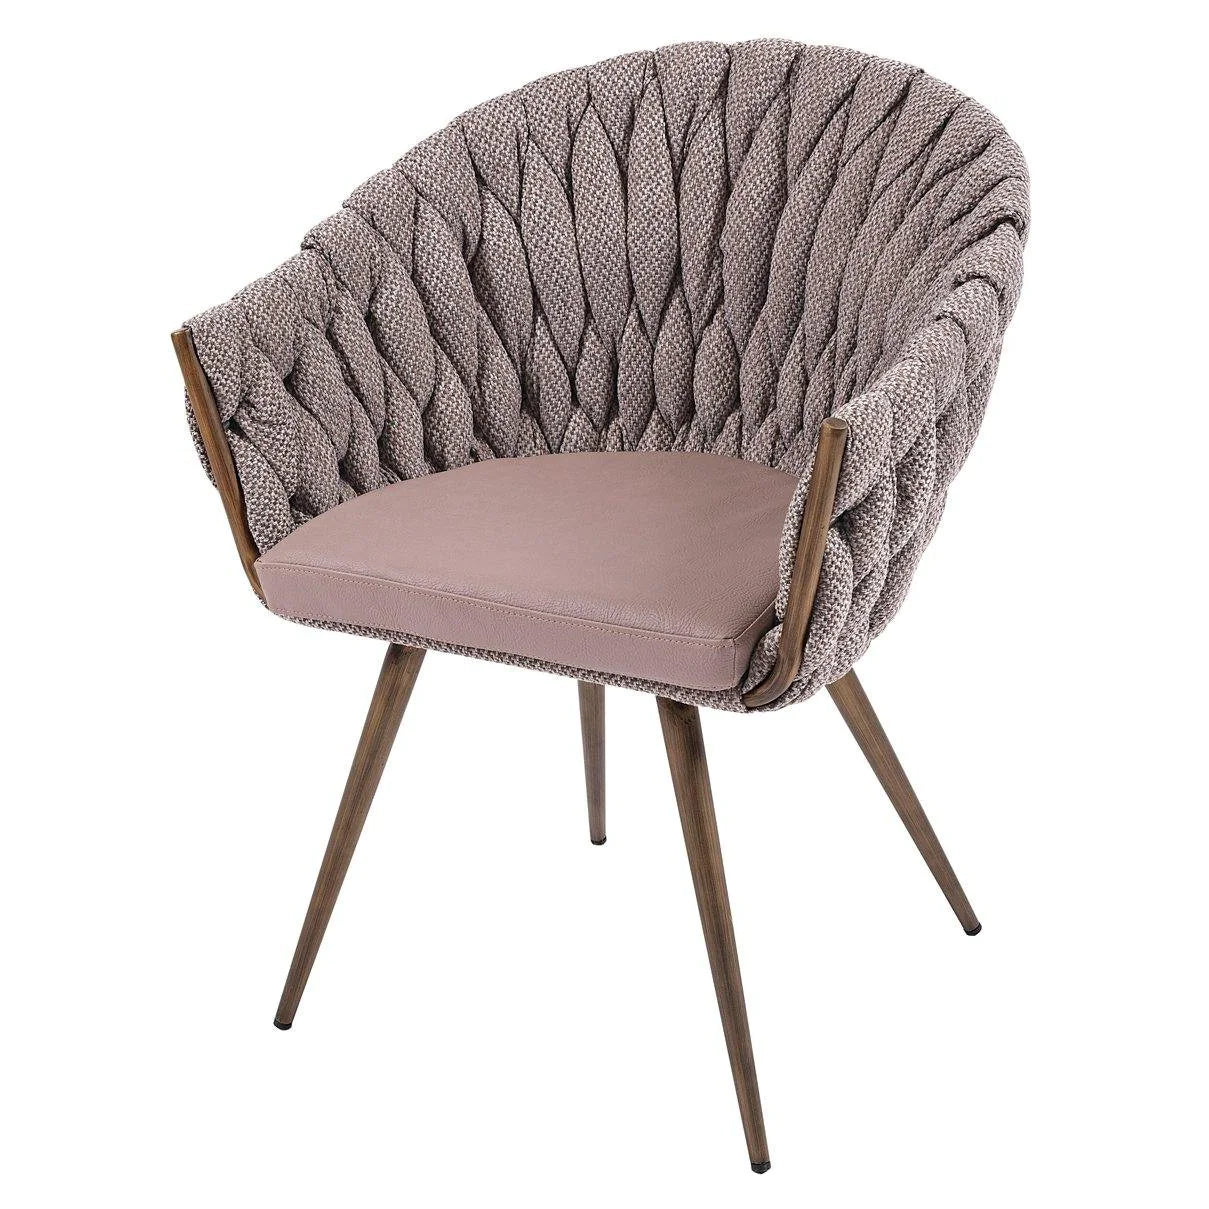 Blake Dining Chair - Taupe Tweed Inspired Fabric & Antique Bronze Finish